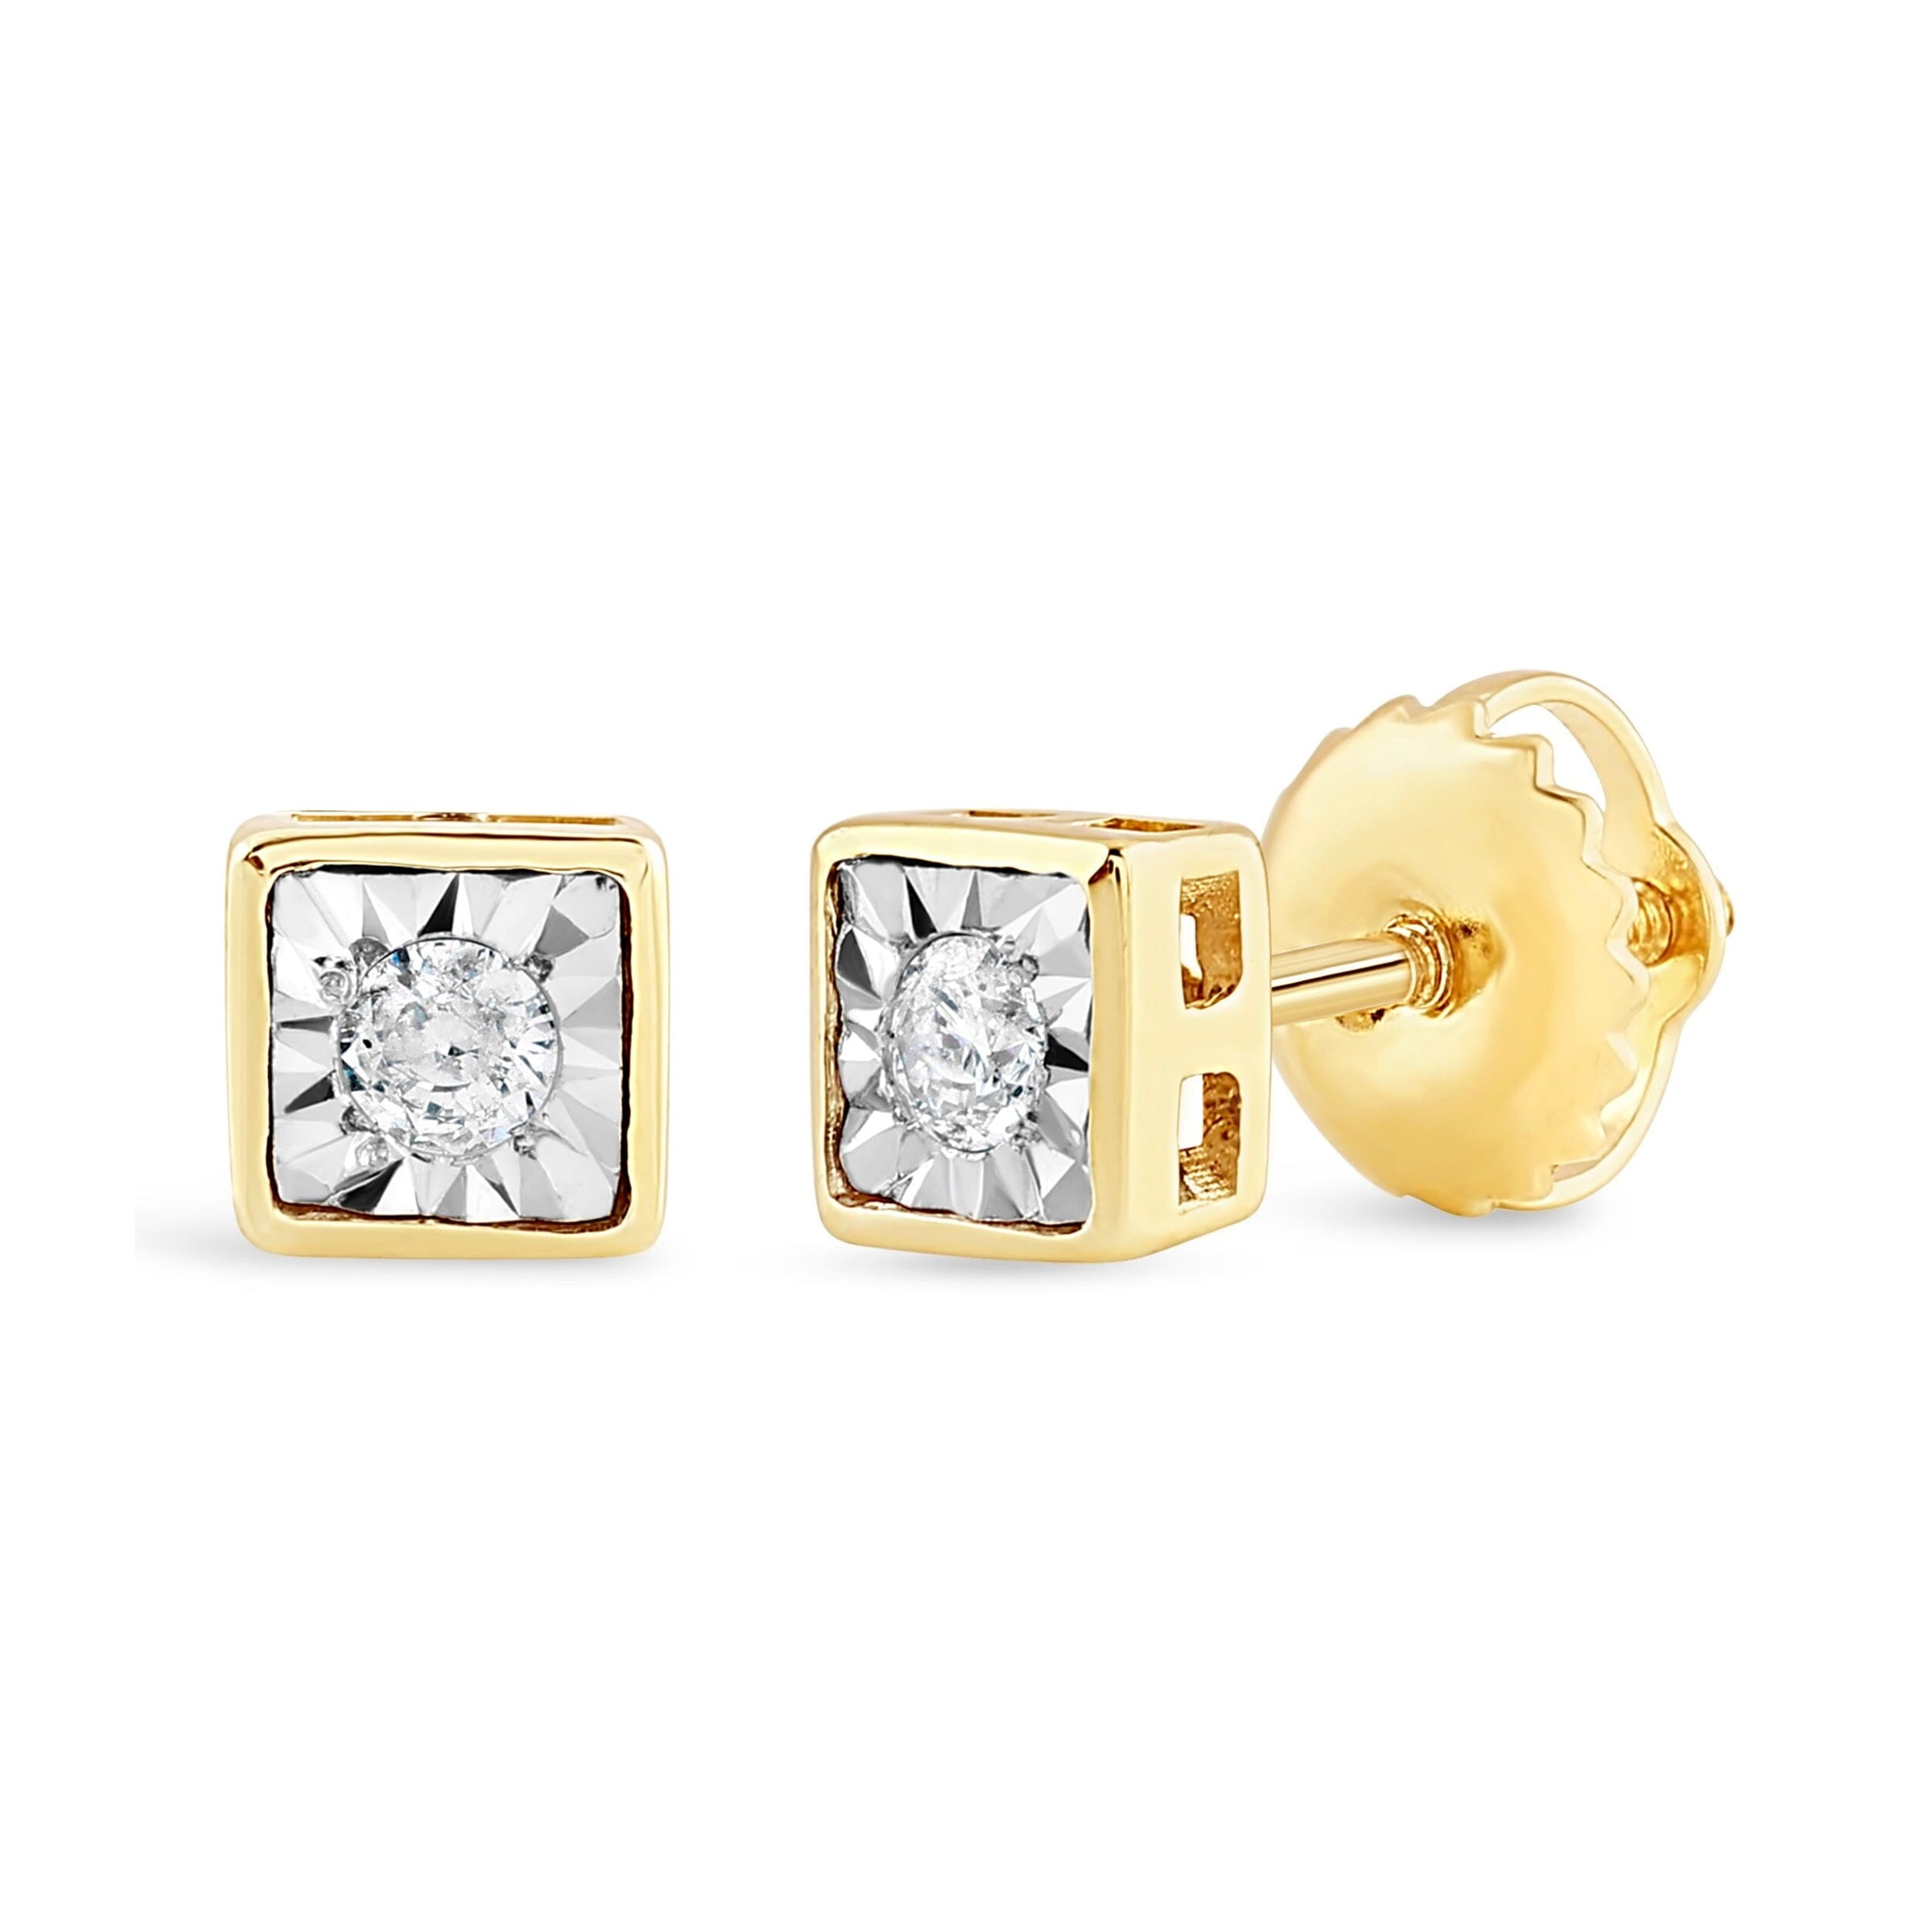 Children's Square Shape Stud Earrings with 0.07ct of Diamonds in 9ct Yellow Gold Earrings Bevilles 